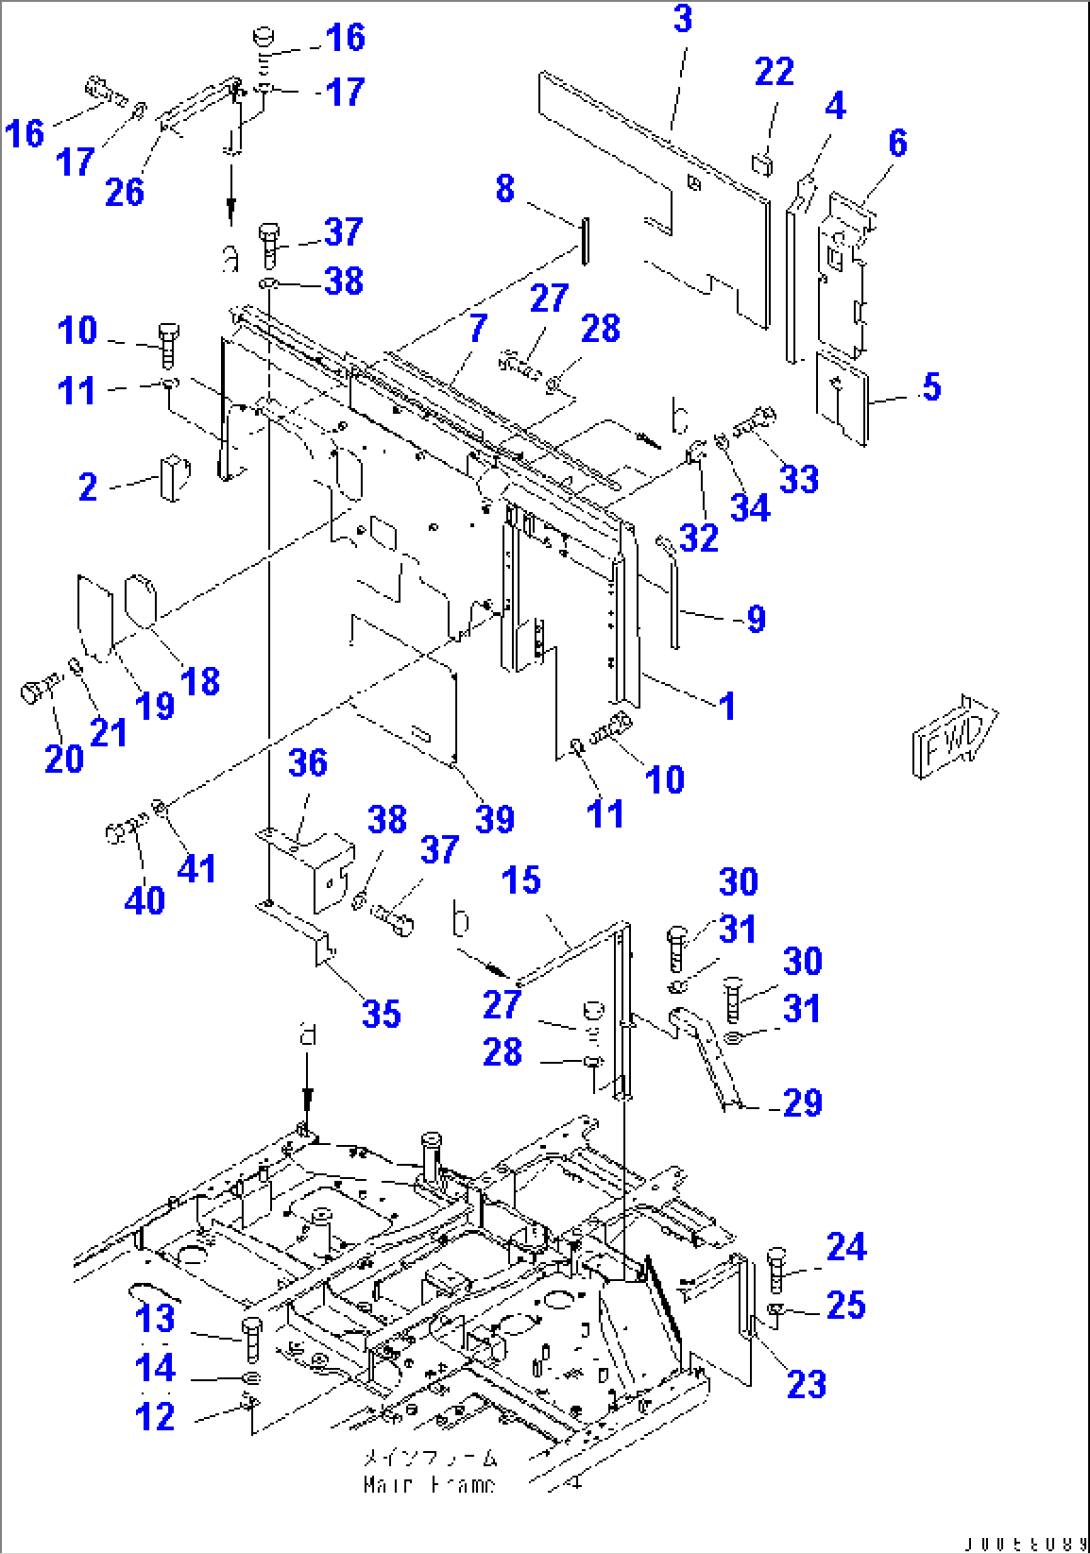 PARTITION (WITH WATER SEPARATOR AND ADDITIONAL FUEL FILTER)(#1317-)